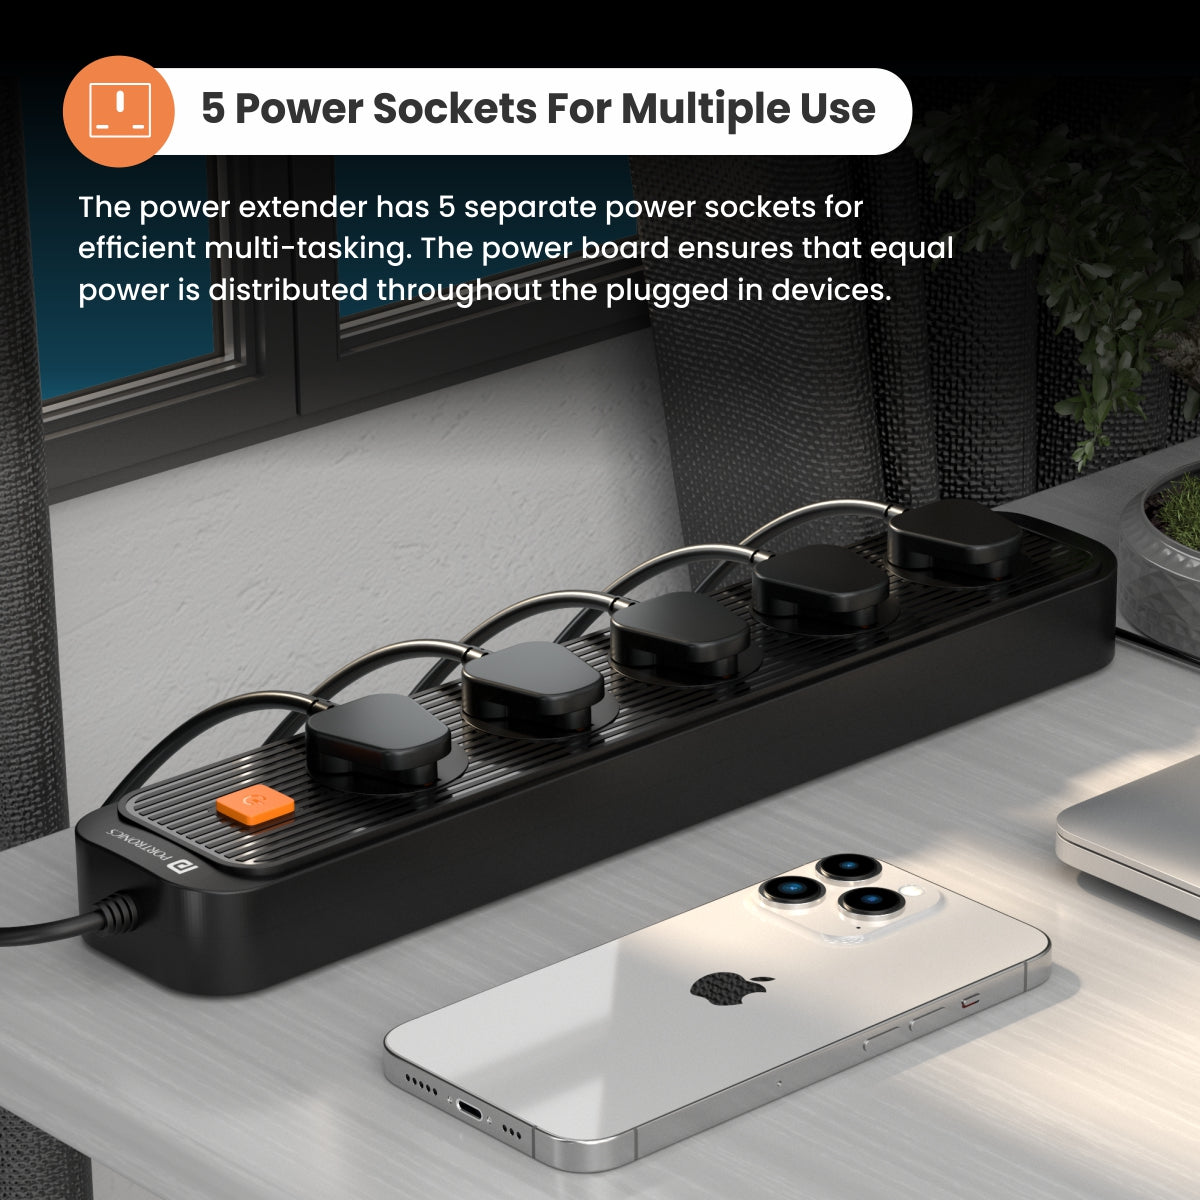 Orange Power board with 5 power sockets for multiple use from portronics